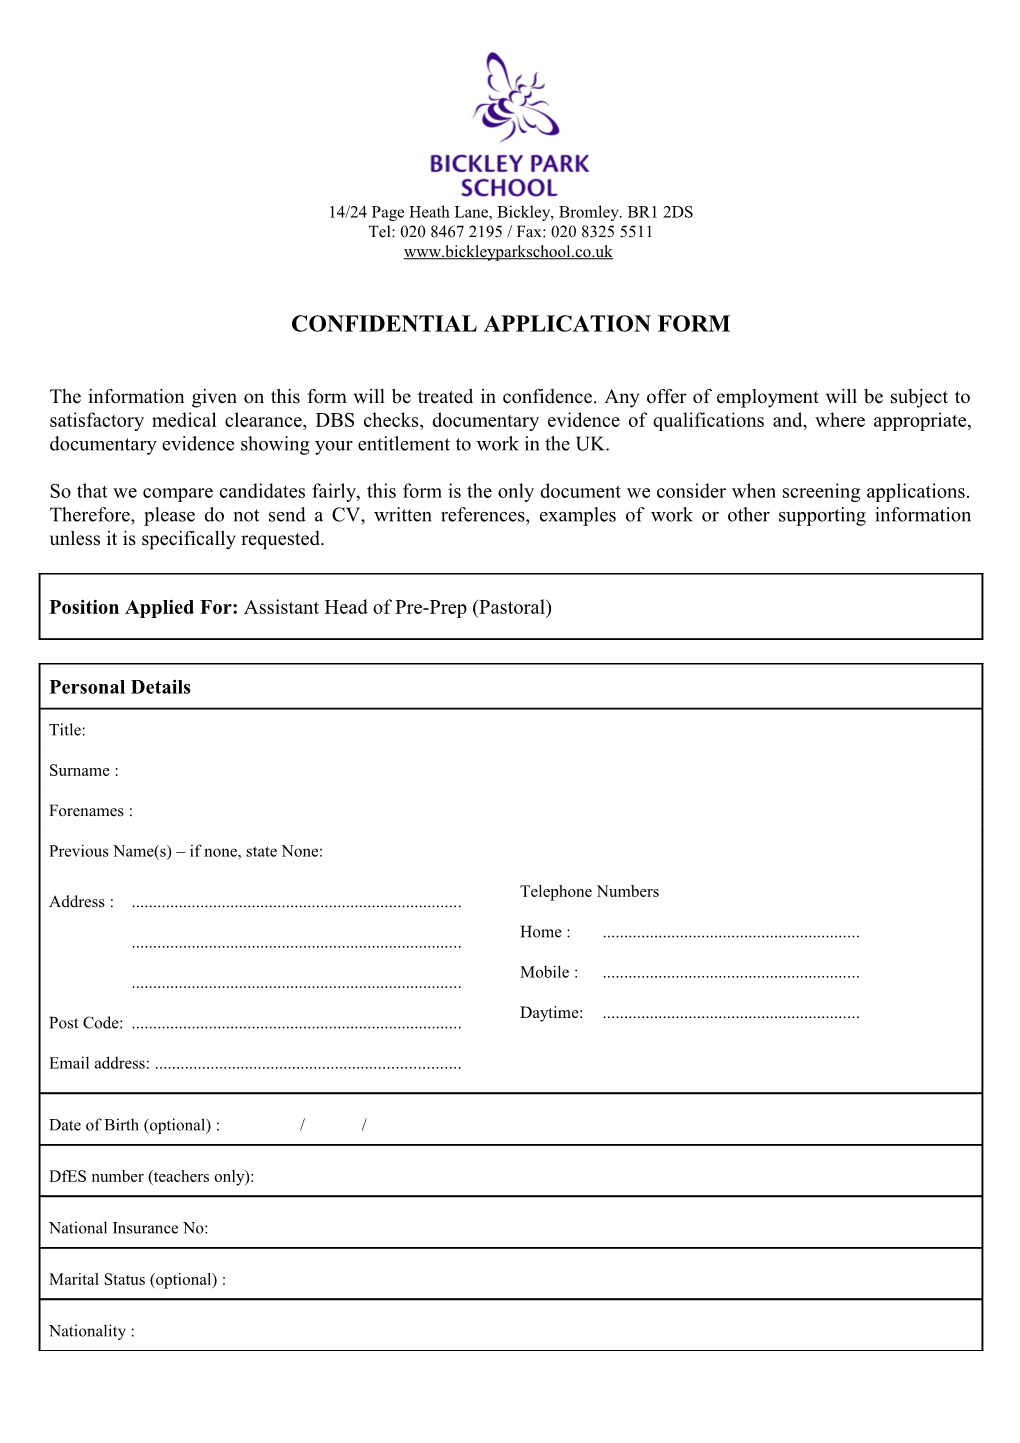 Confidential Application Form s4